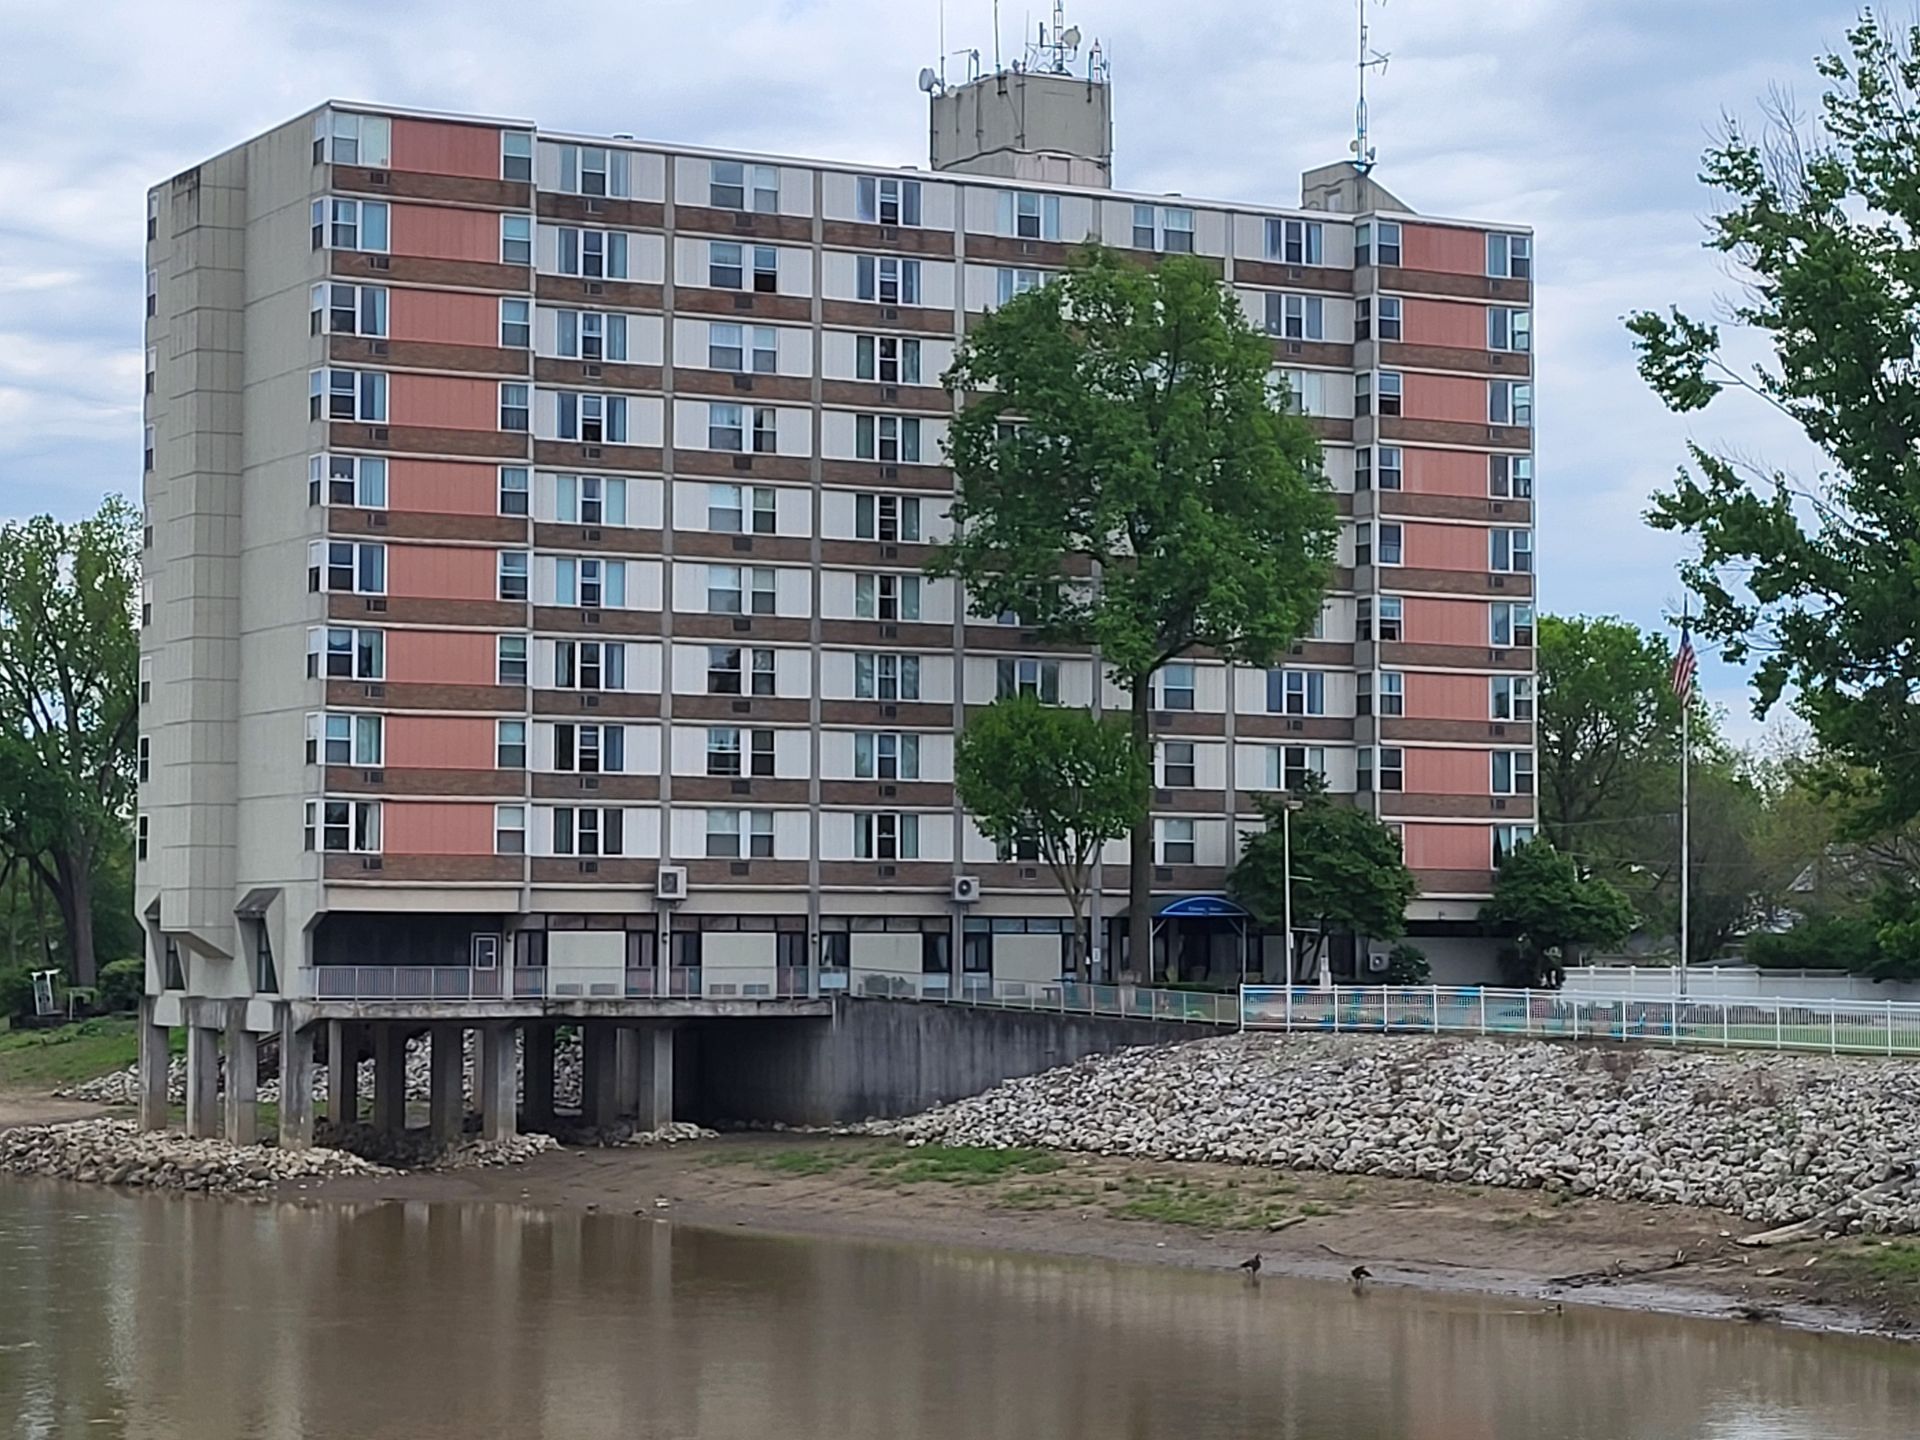 A tall building with a bridge over a body of water